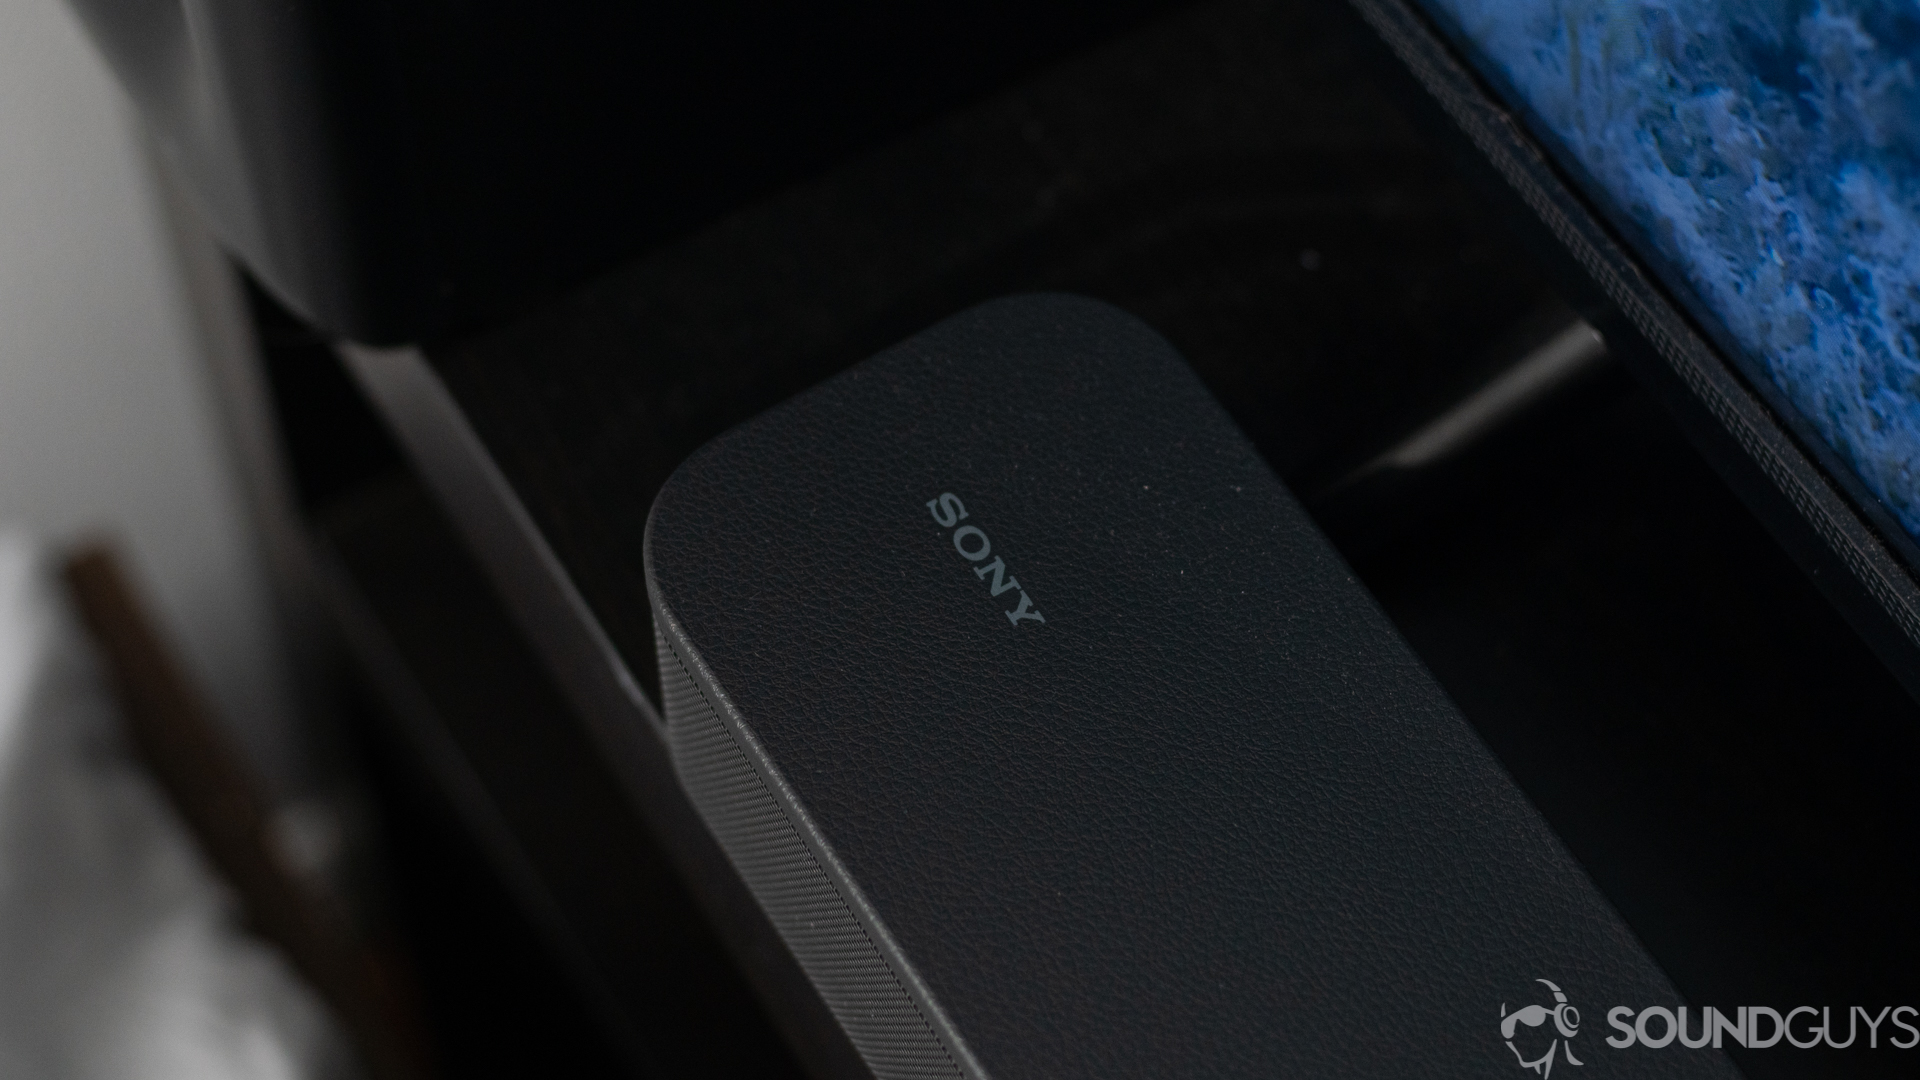 Close-up of sony logo on the Sony HT-S350 soundbar in front of the TV